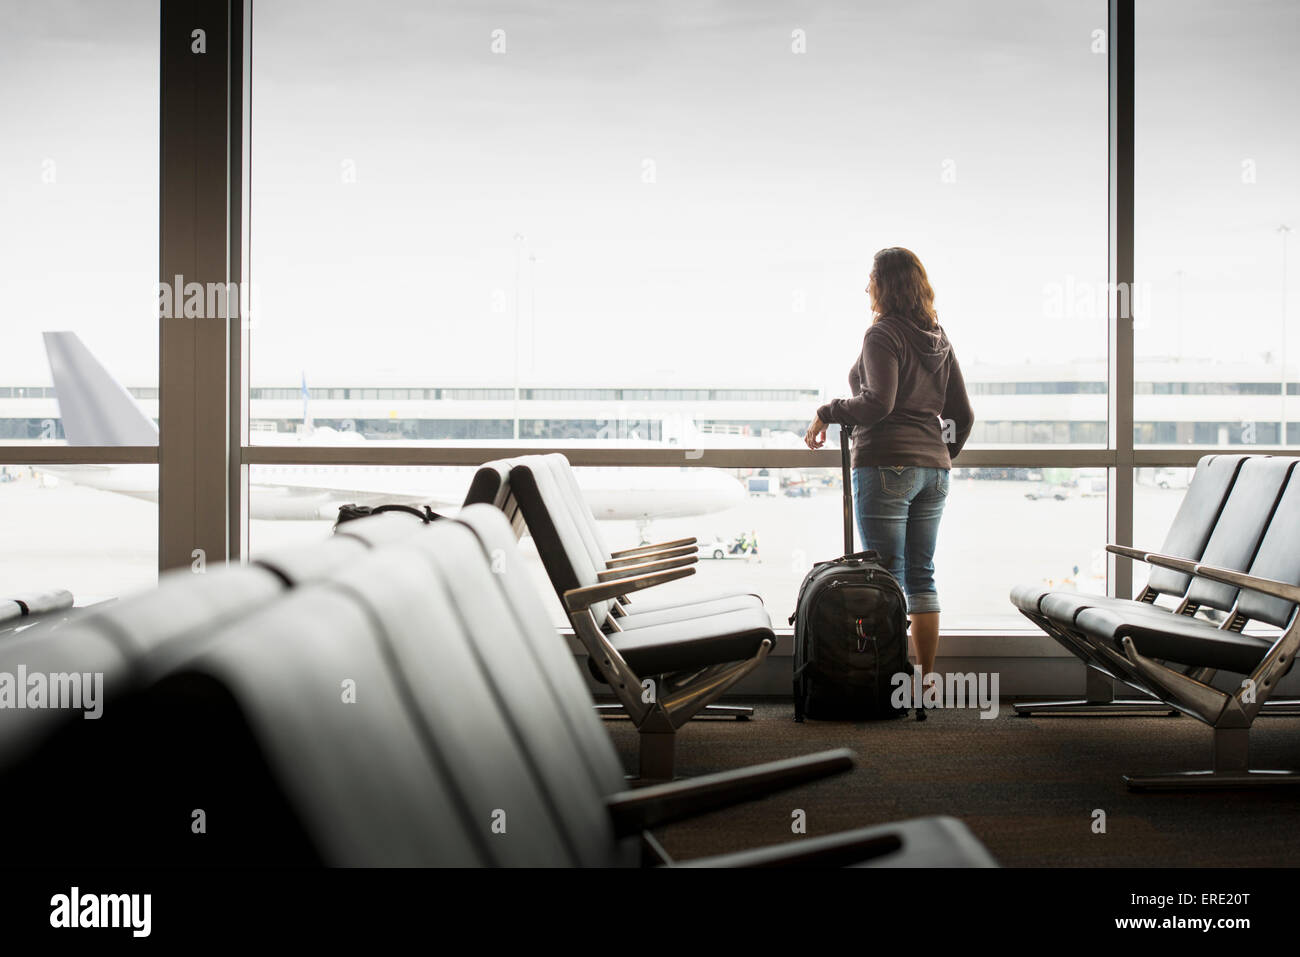 Hispanic woman looking out airport window Stock Photo